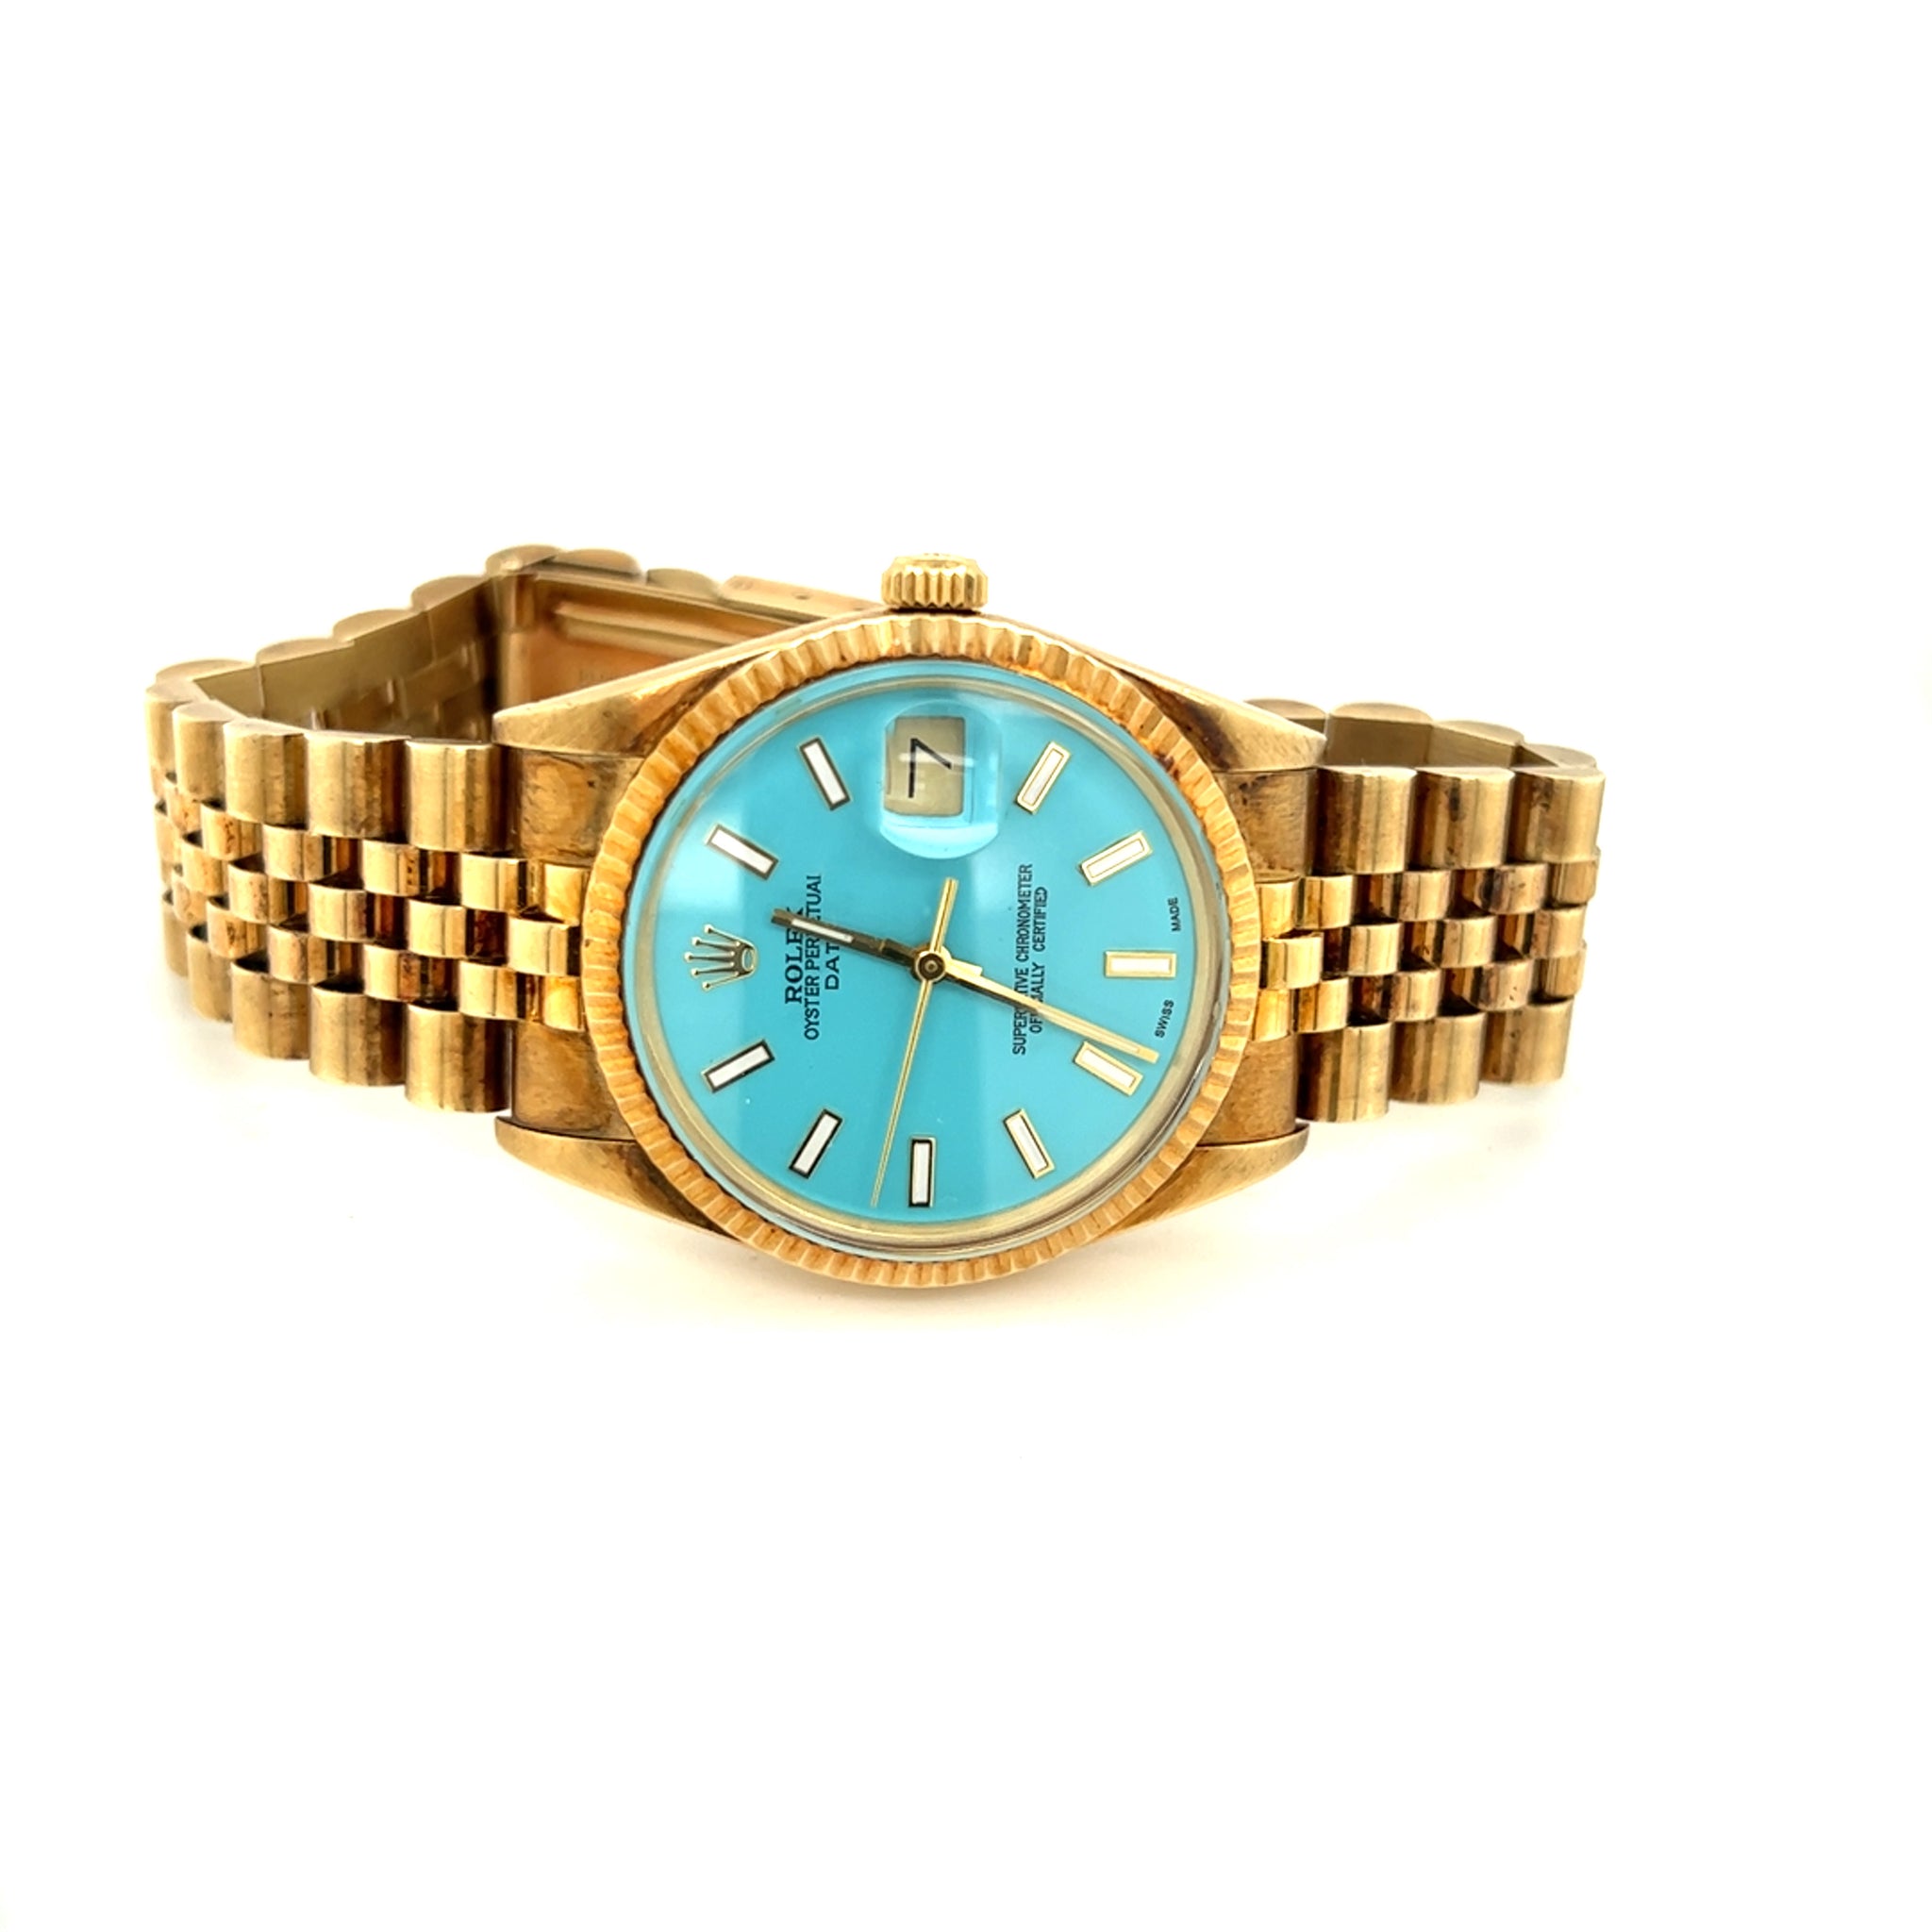 NOS 1987 14kt Gold Rolex Date ref 15037 Turquoise